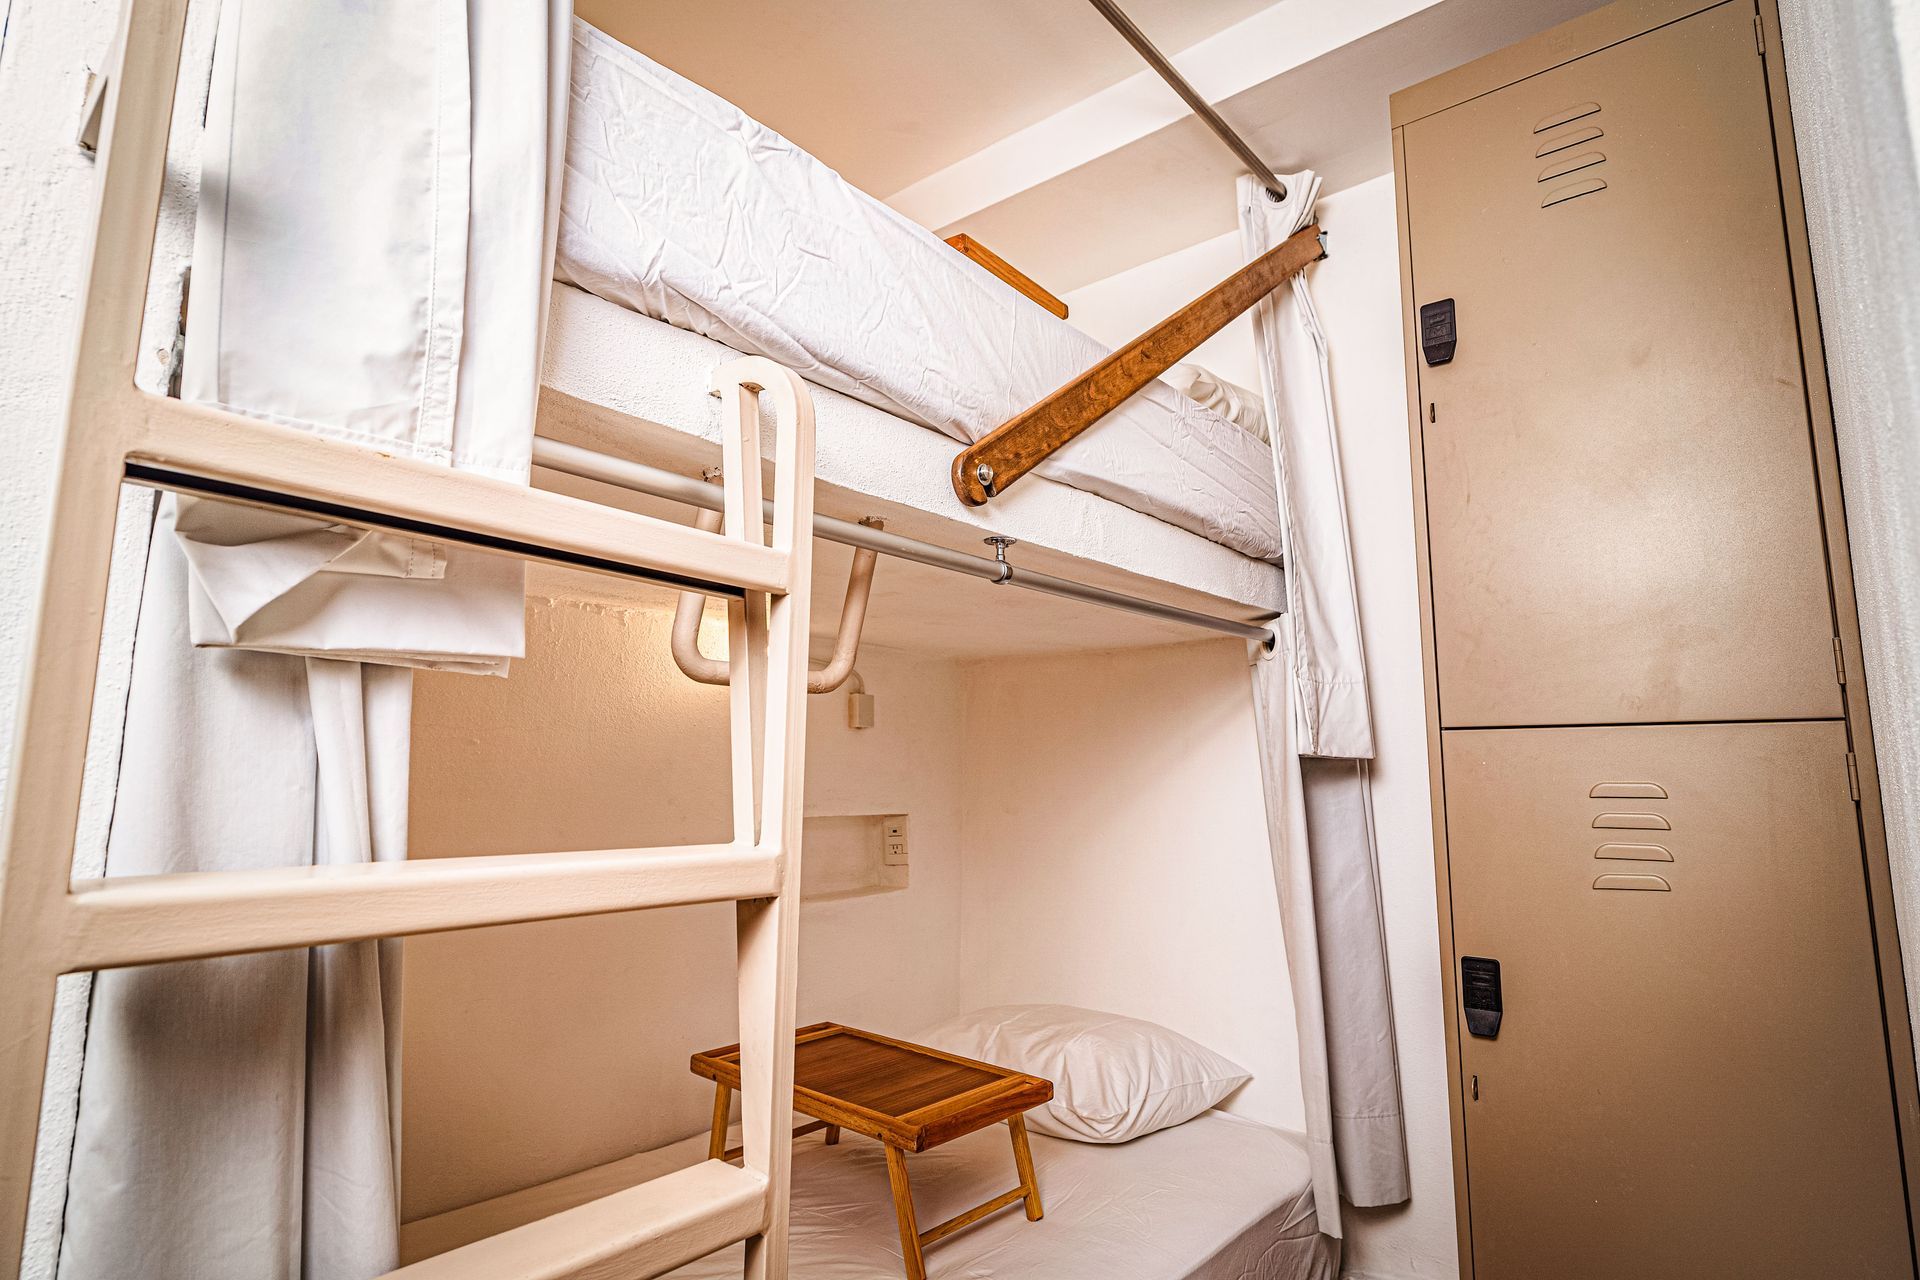 A bunk bed with a ladder in a room with lockers.